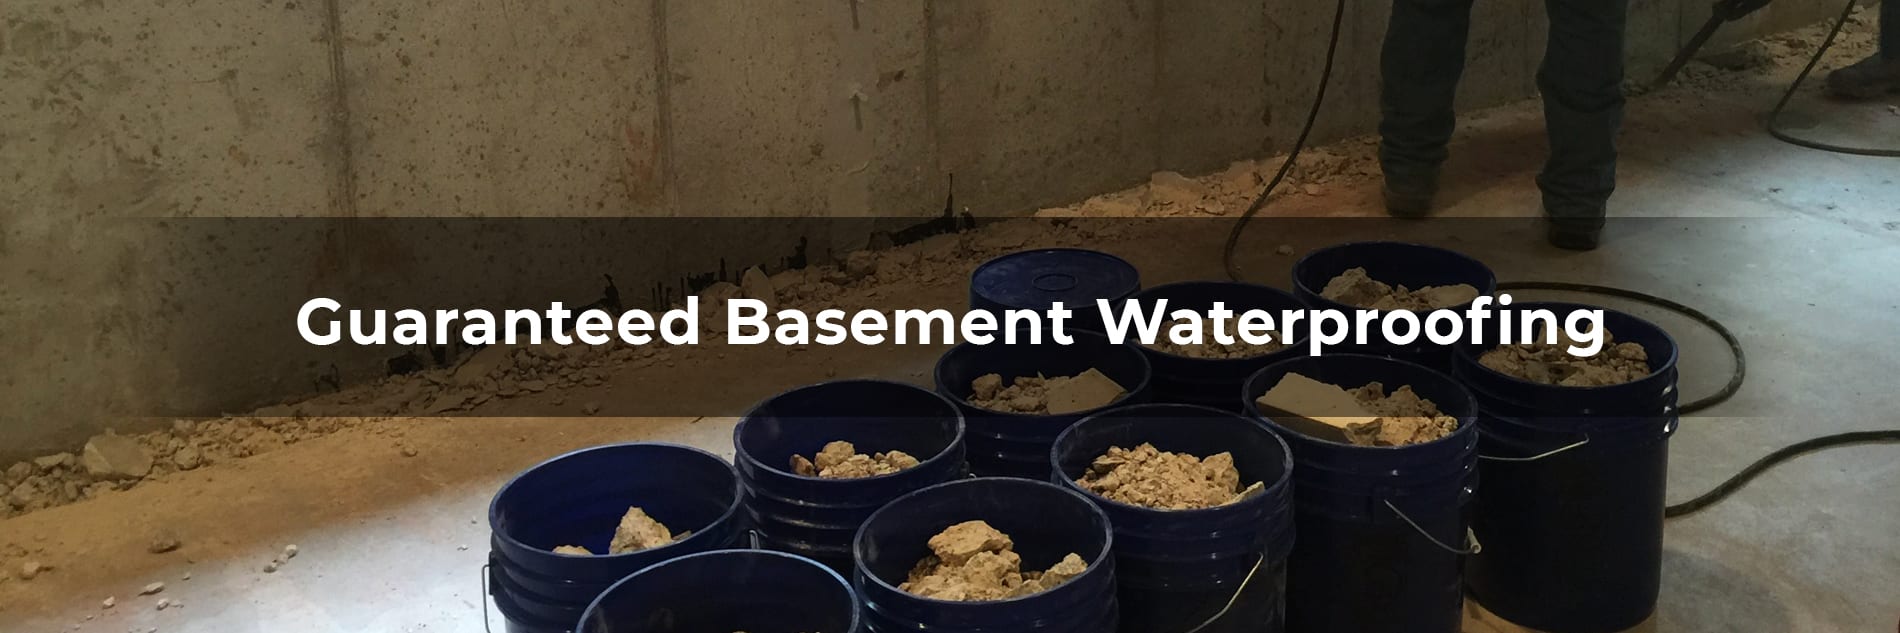 Basement Waterproofing Services St Louis MO